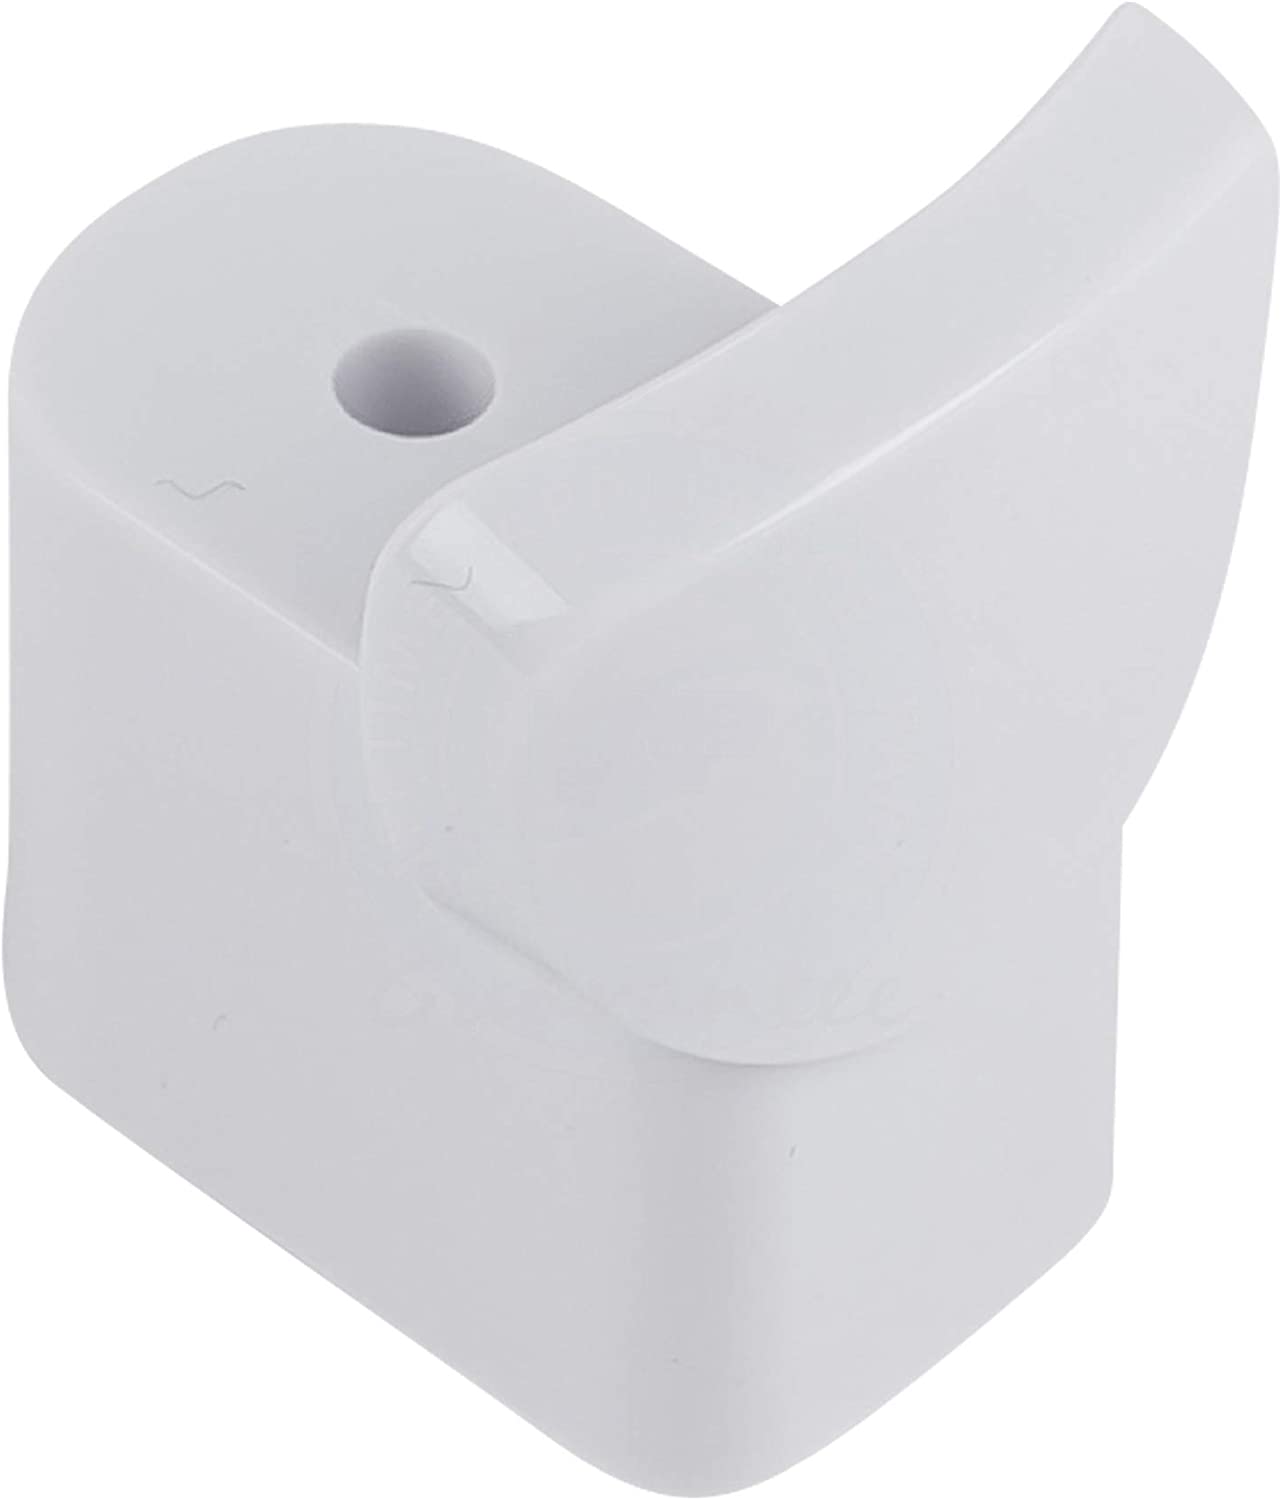 2 x WB06X10943 Handle Support Compatible with General Electric Microwave